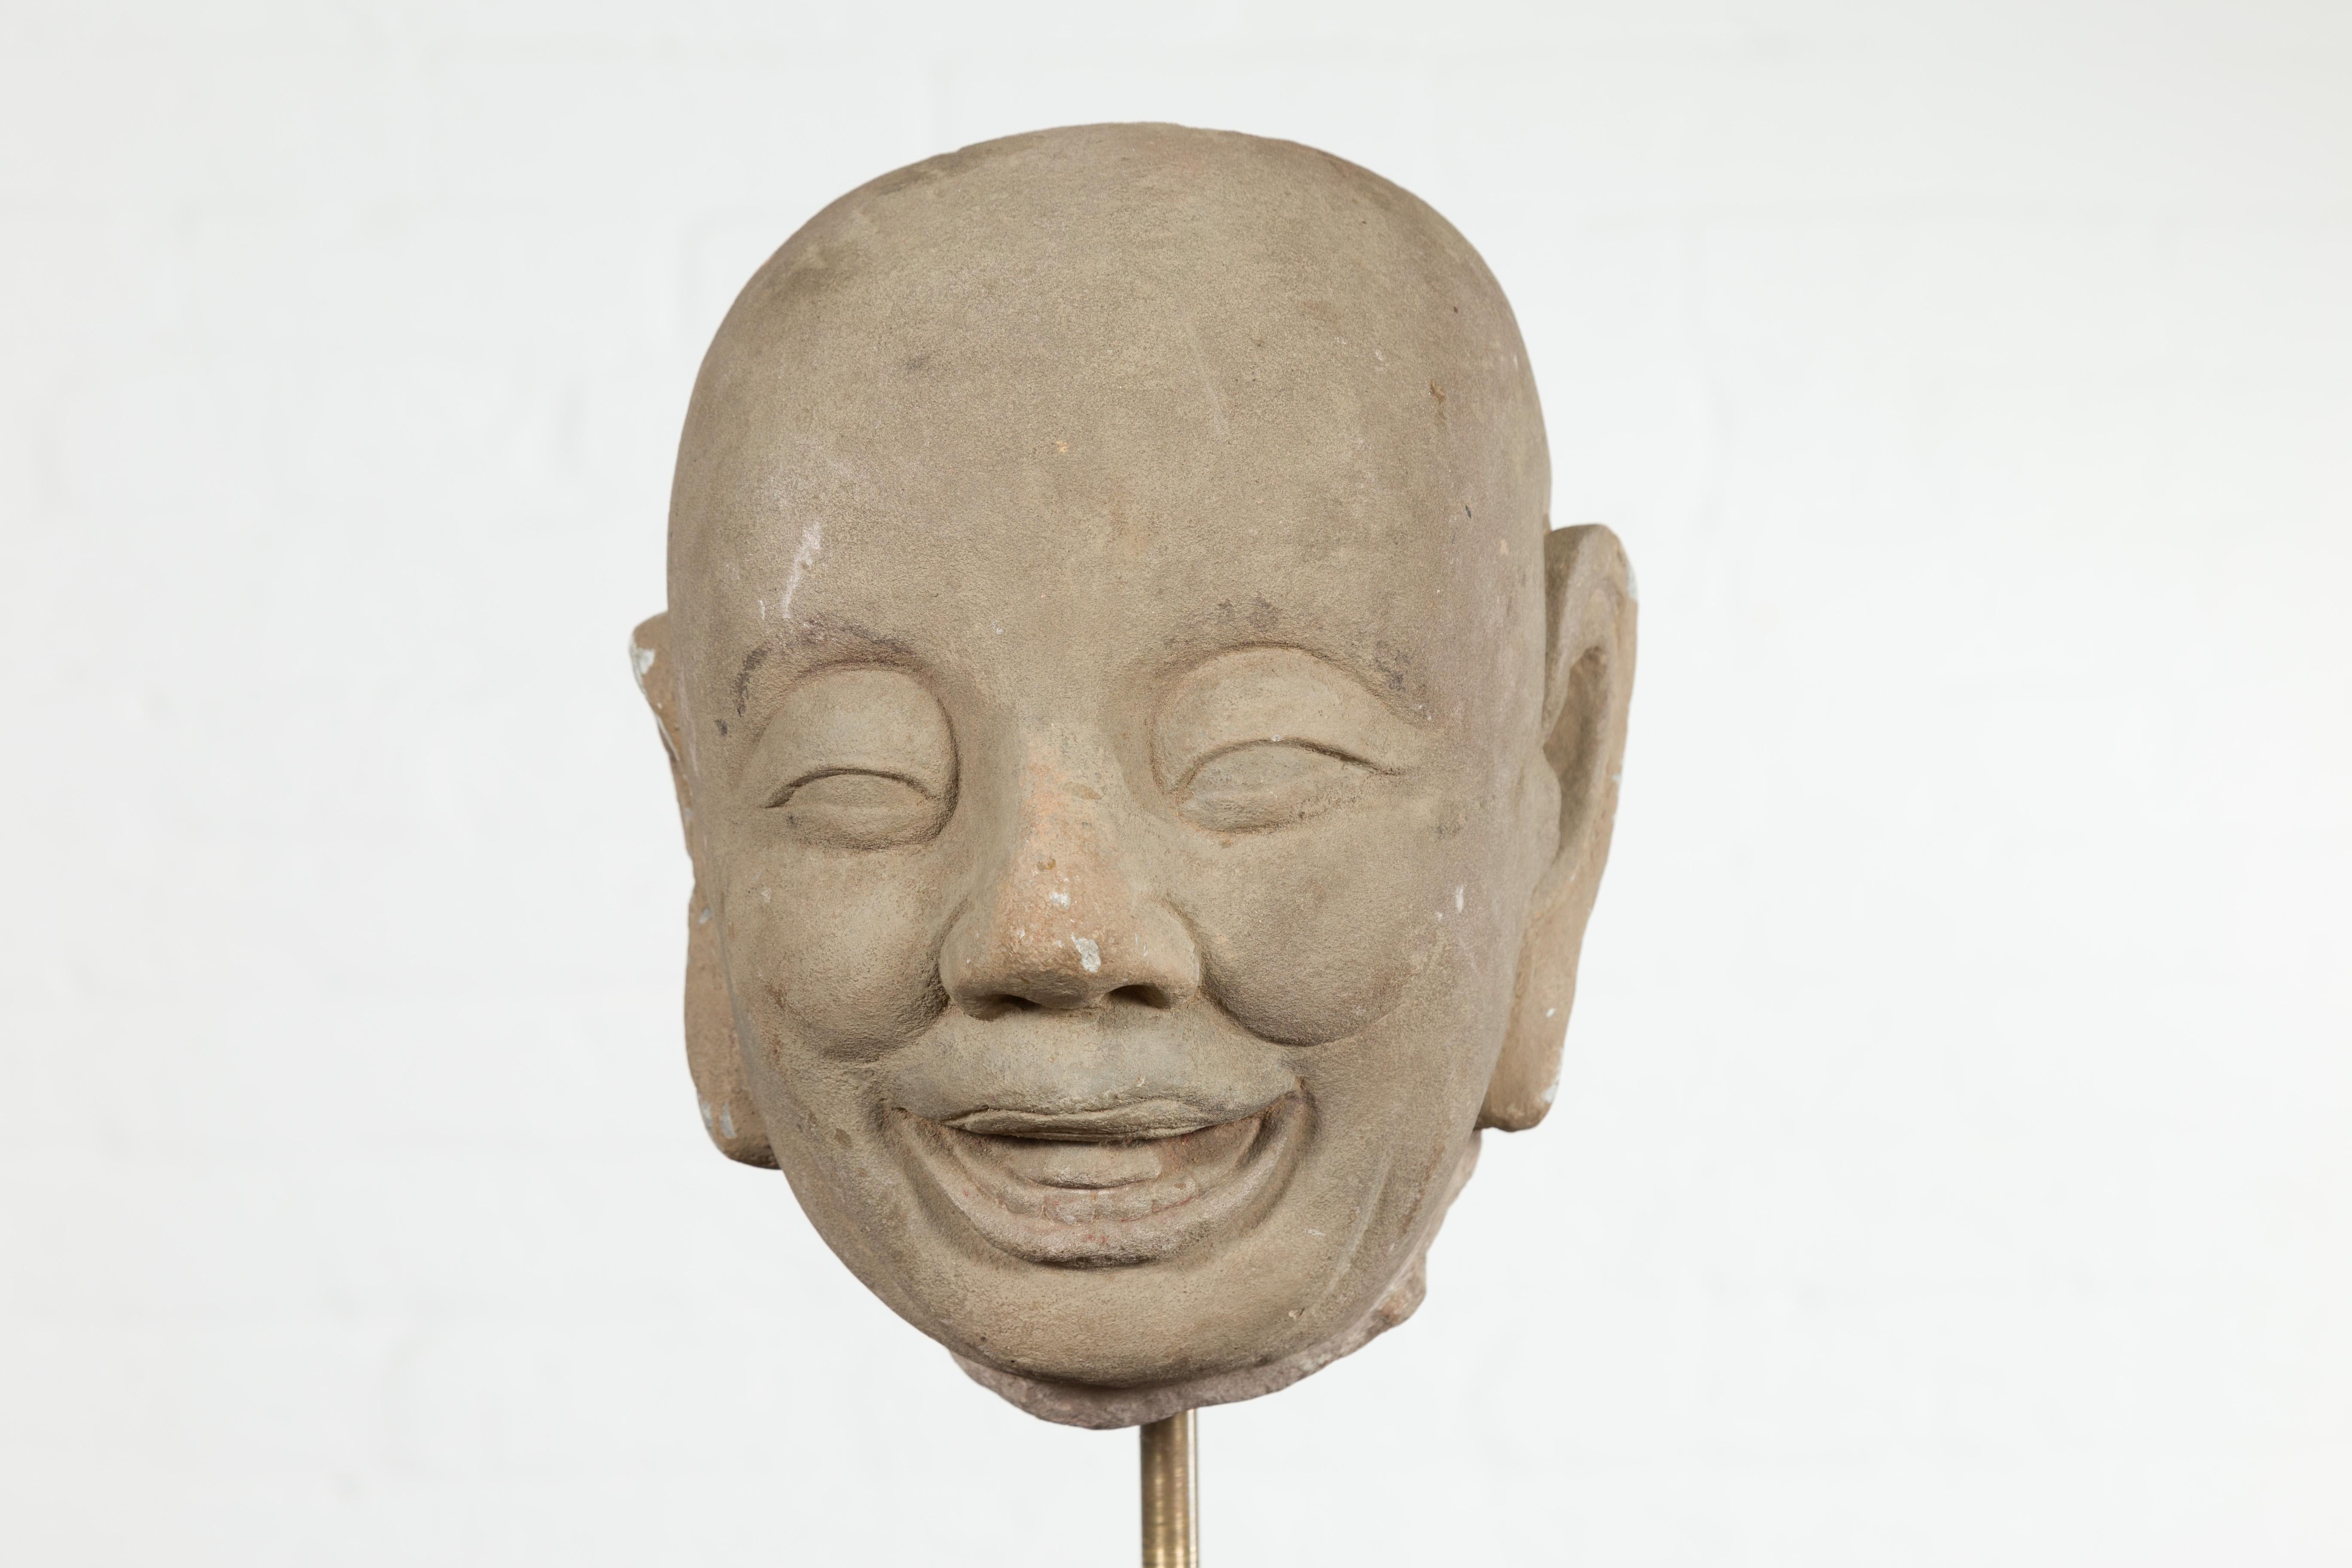 Chinese Song Dynasty Hand-Carved Limestone Head of a Lohan circa 960 to 1279 AD 6